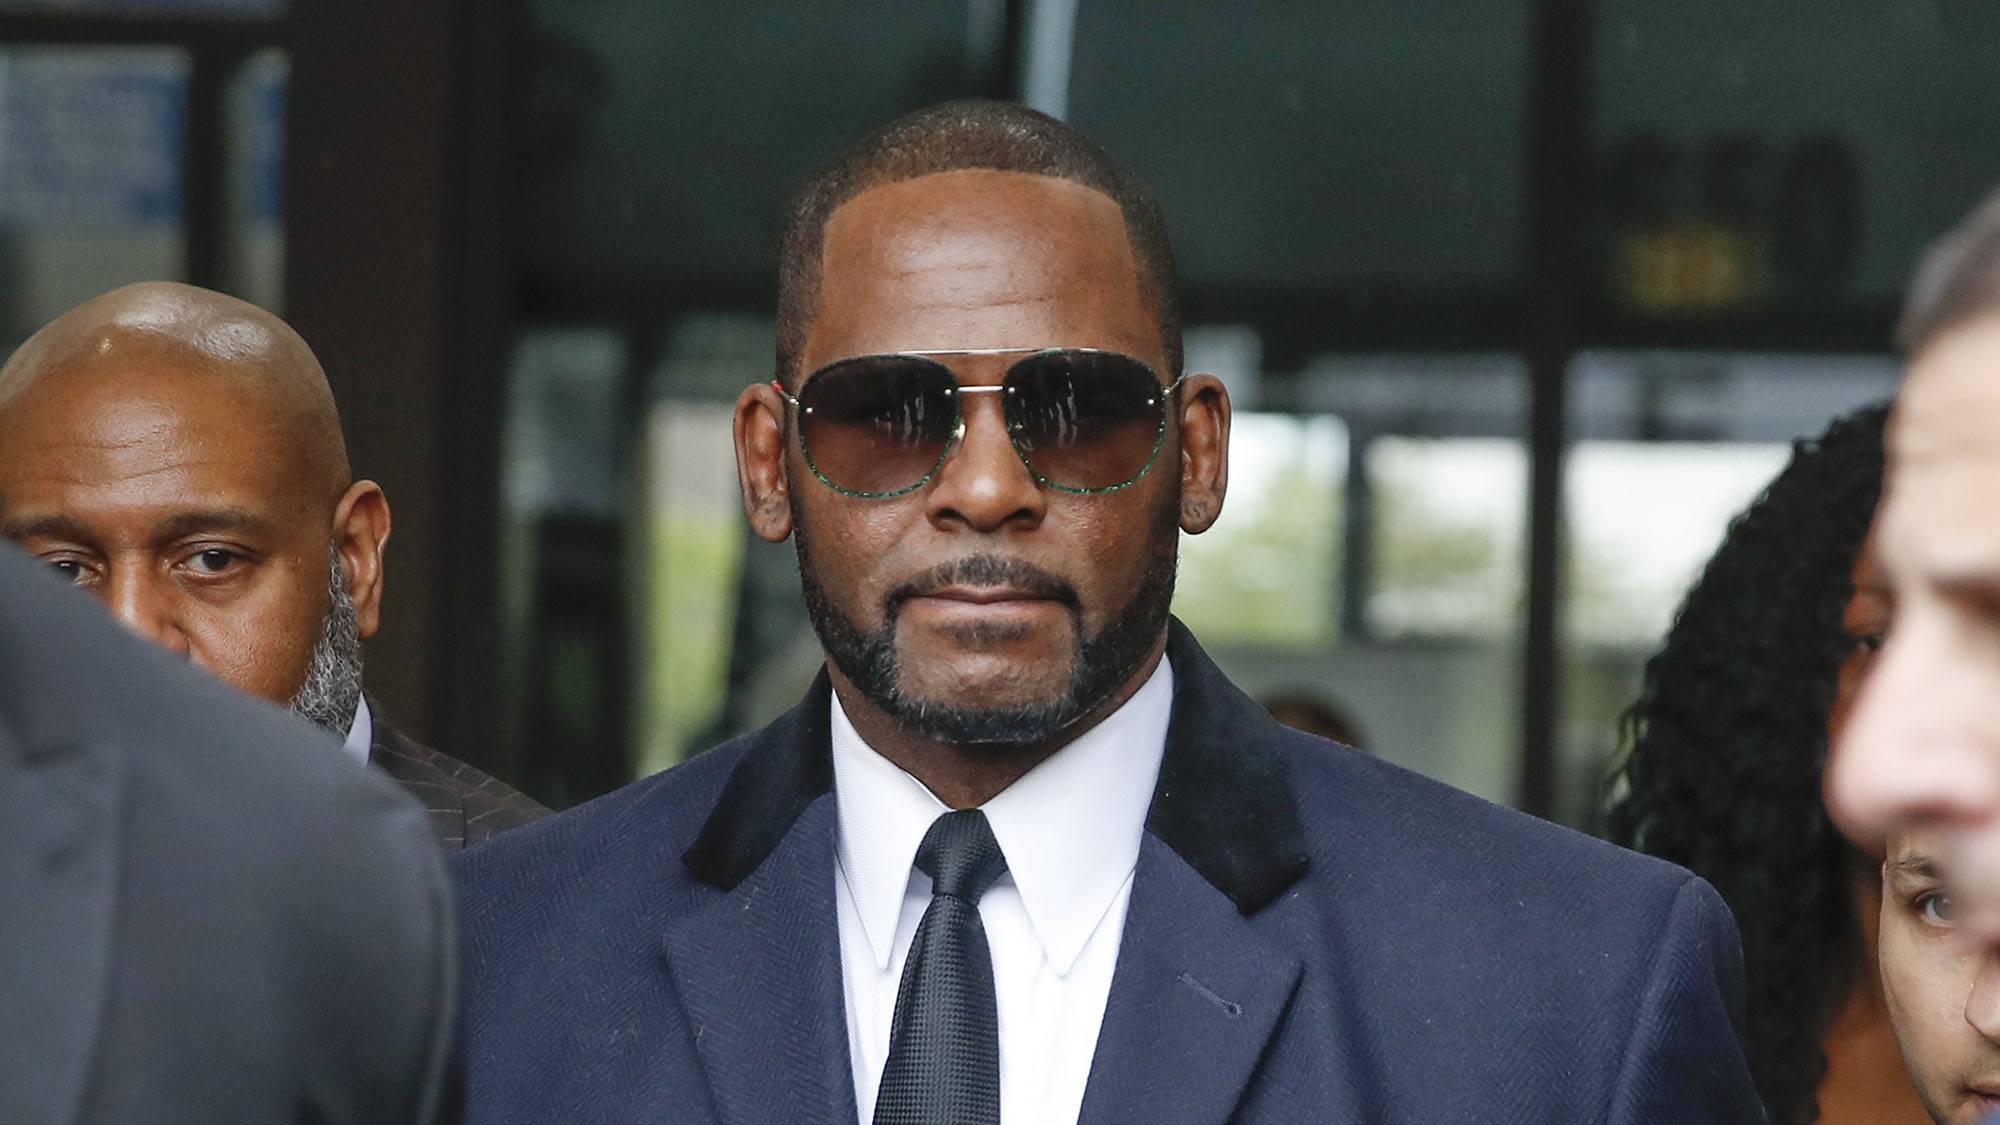 Pronsexvideos Free Downlod - Girl In Sex Videos Allegedly Recorded By R. Kelly Expected To Testify |  News | BET